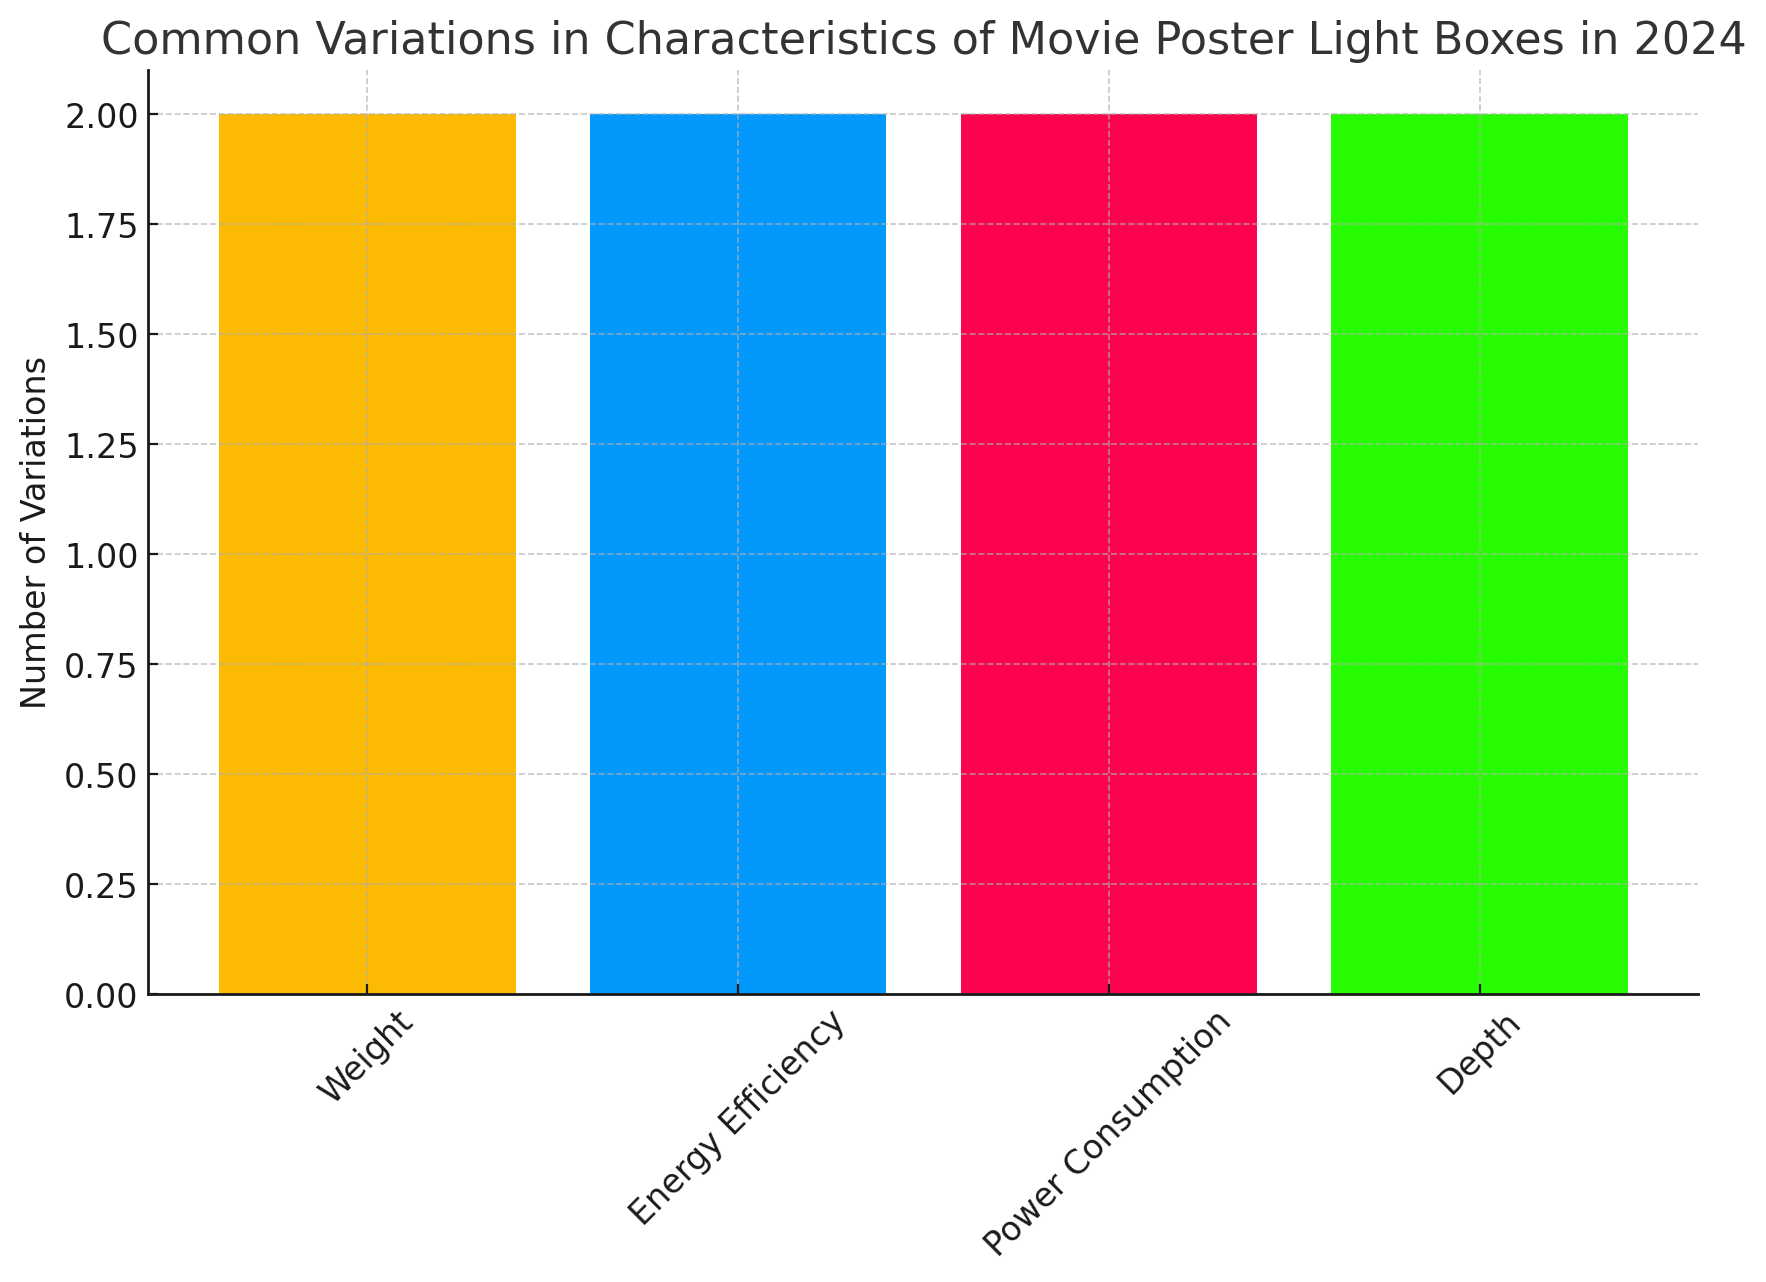 Average Characteristics of Movie Poster Light Boxes in 2024